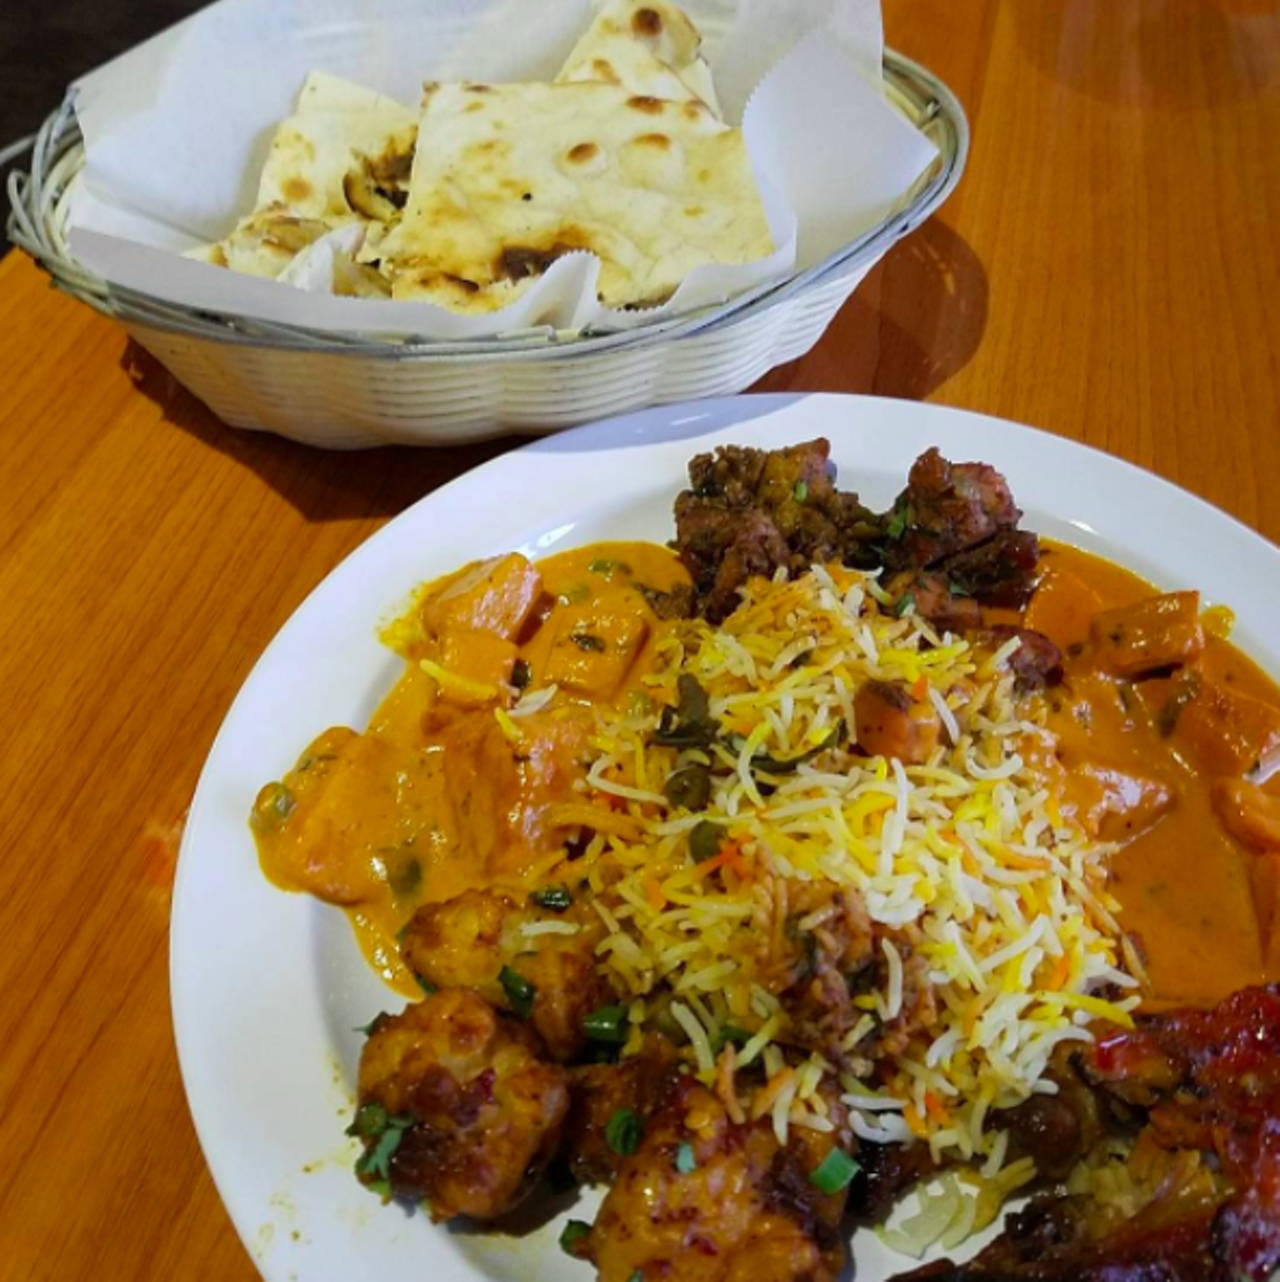 Spice Fine Indian Cuisine
4987 NW 410, (210) 253-9658, spicefineindiancuisine.com
Go for the tandoori sizzlers, with options like paneer tikka and lamb sheesh kebab.
Photo via Instagram, hindsight_world_traveler